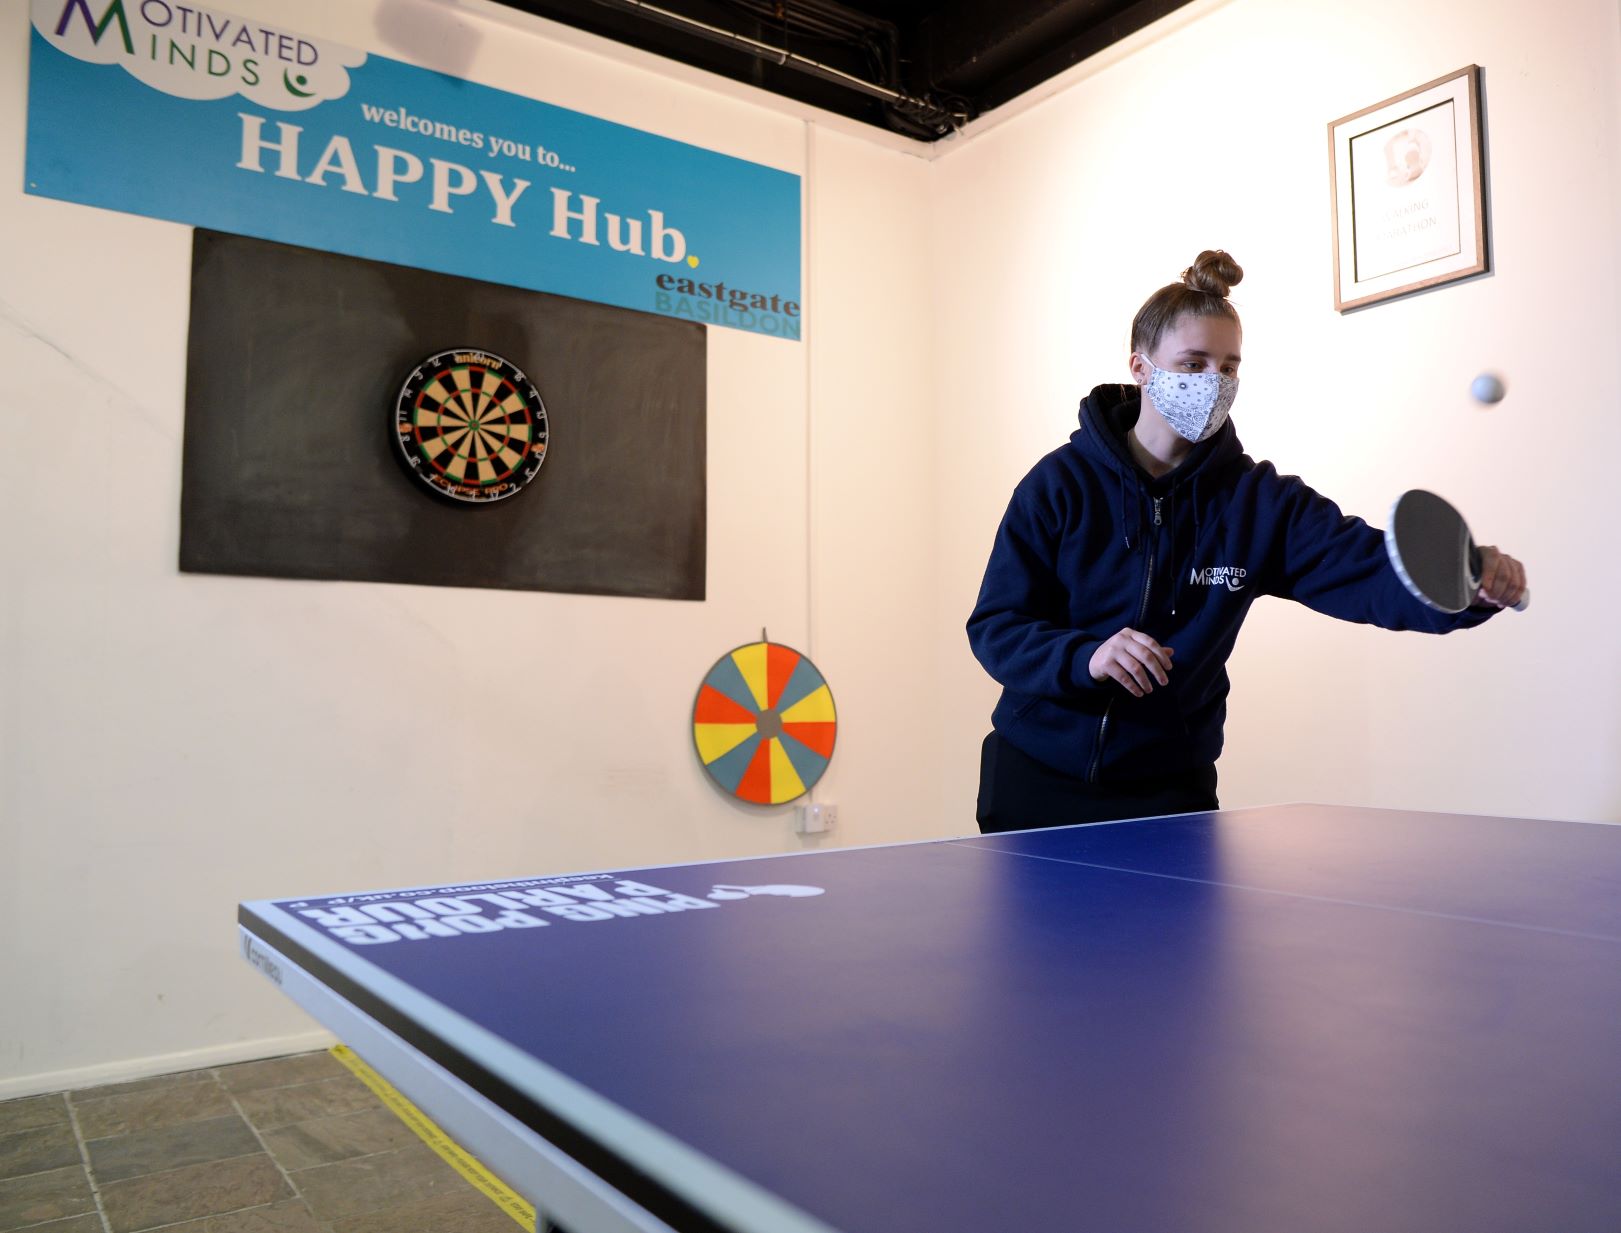 Lady playing table tennis at the Happy Hub